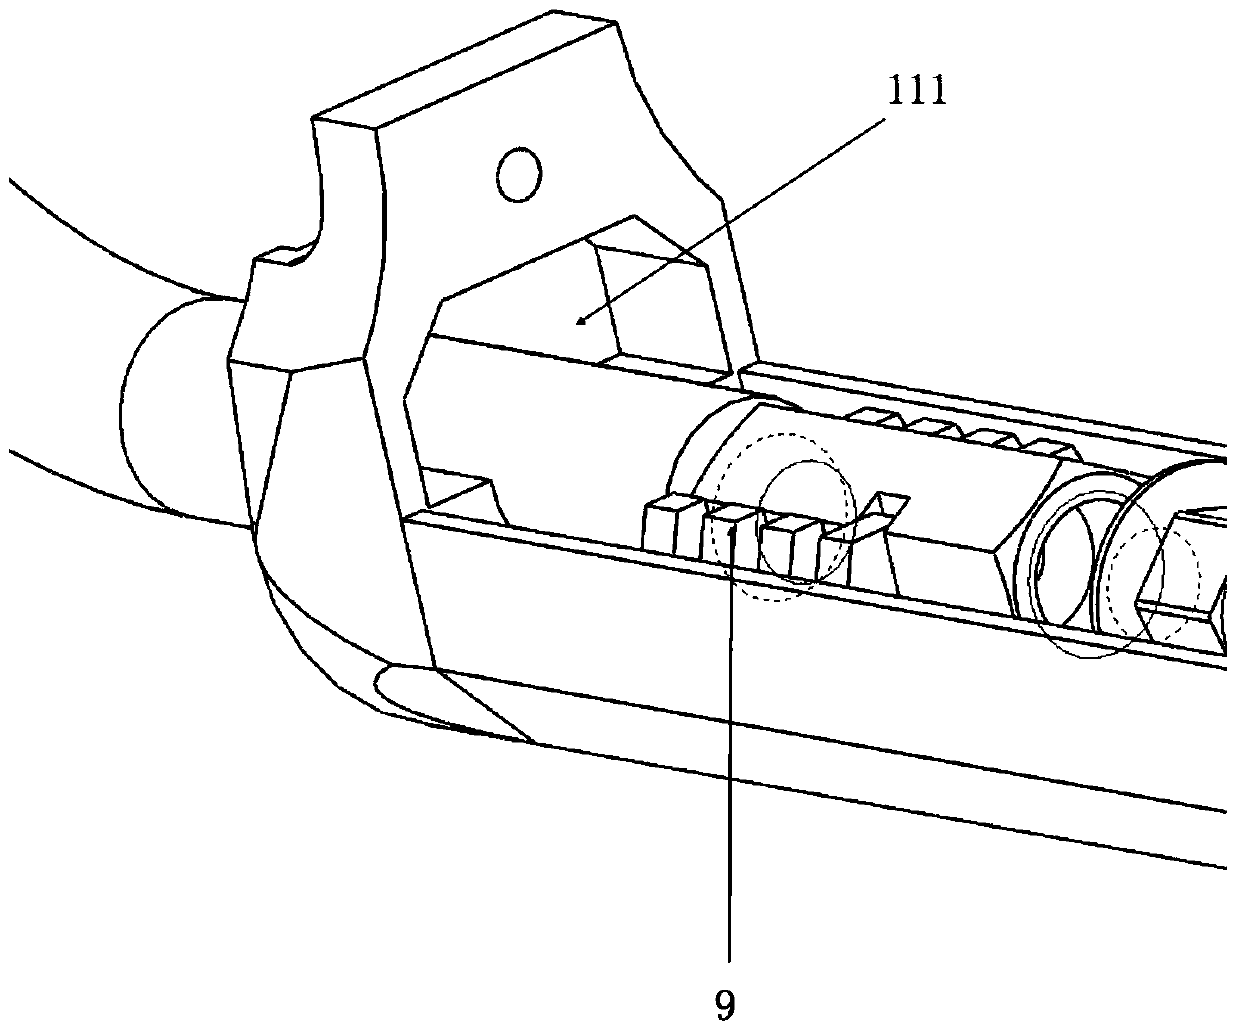 A welding torch housing and a welding torch having the same